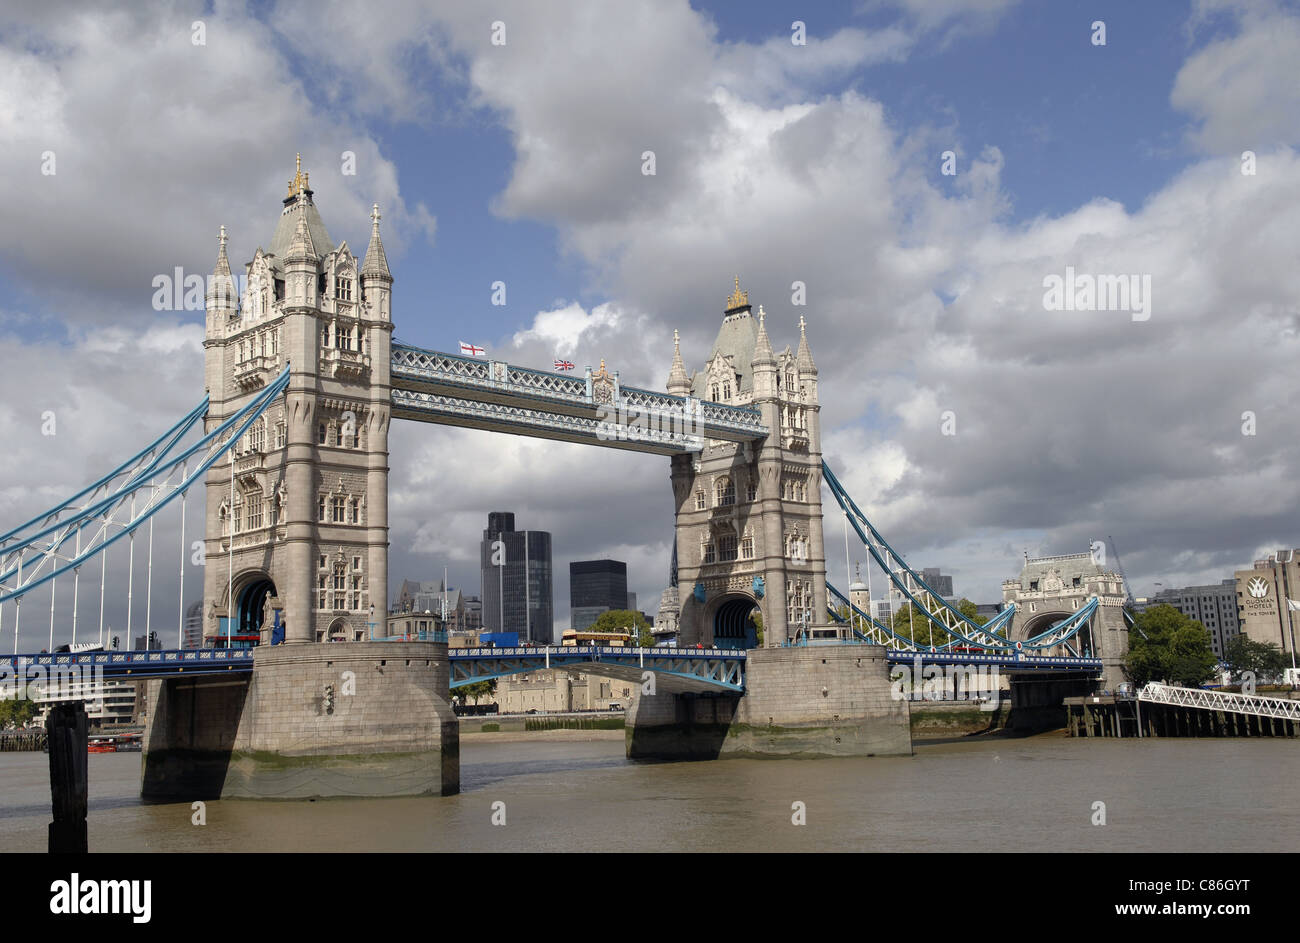 View of Tower Bridge on River Thames, London, taken from South Bank. Lovely Autumn light with good cloud formations. Stock Photo